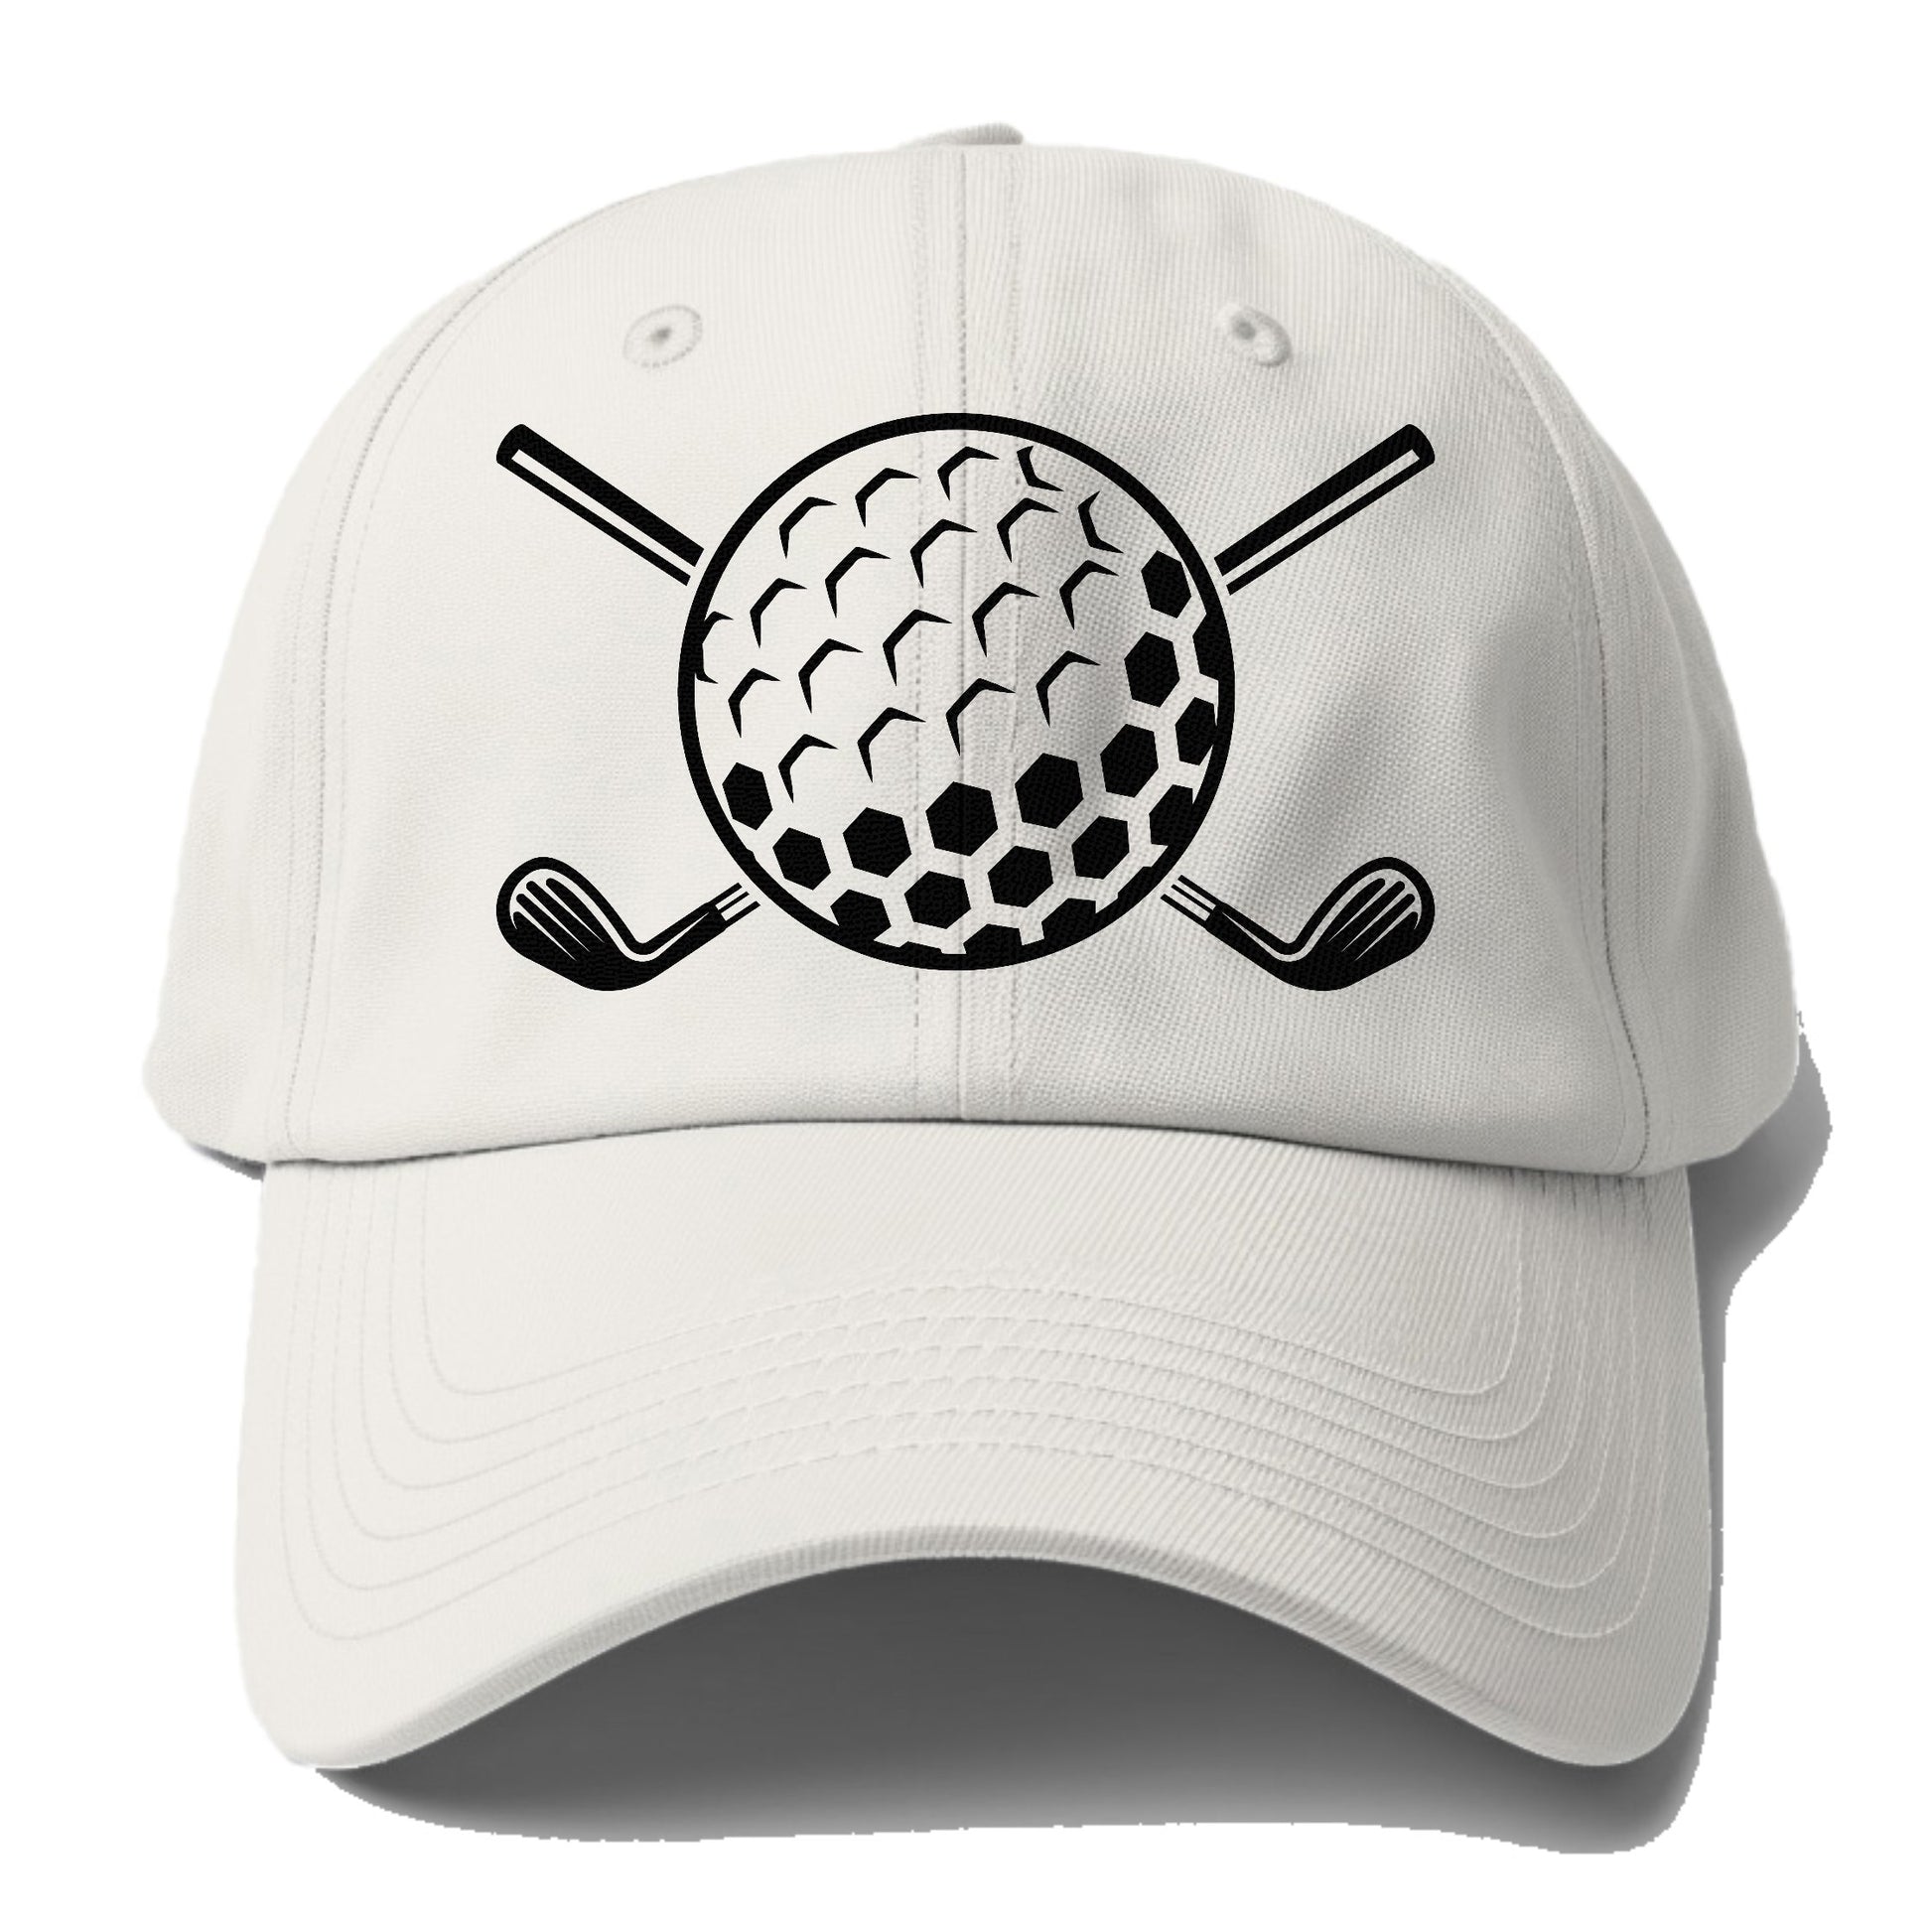 Golf Ball and Clubs! Baseball Cap for Big Heads Pink